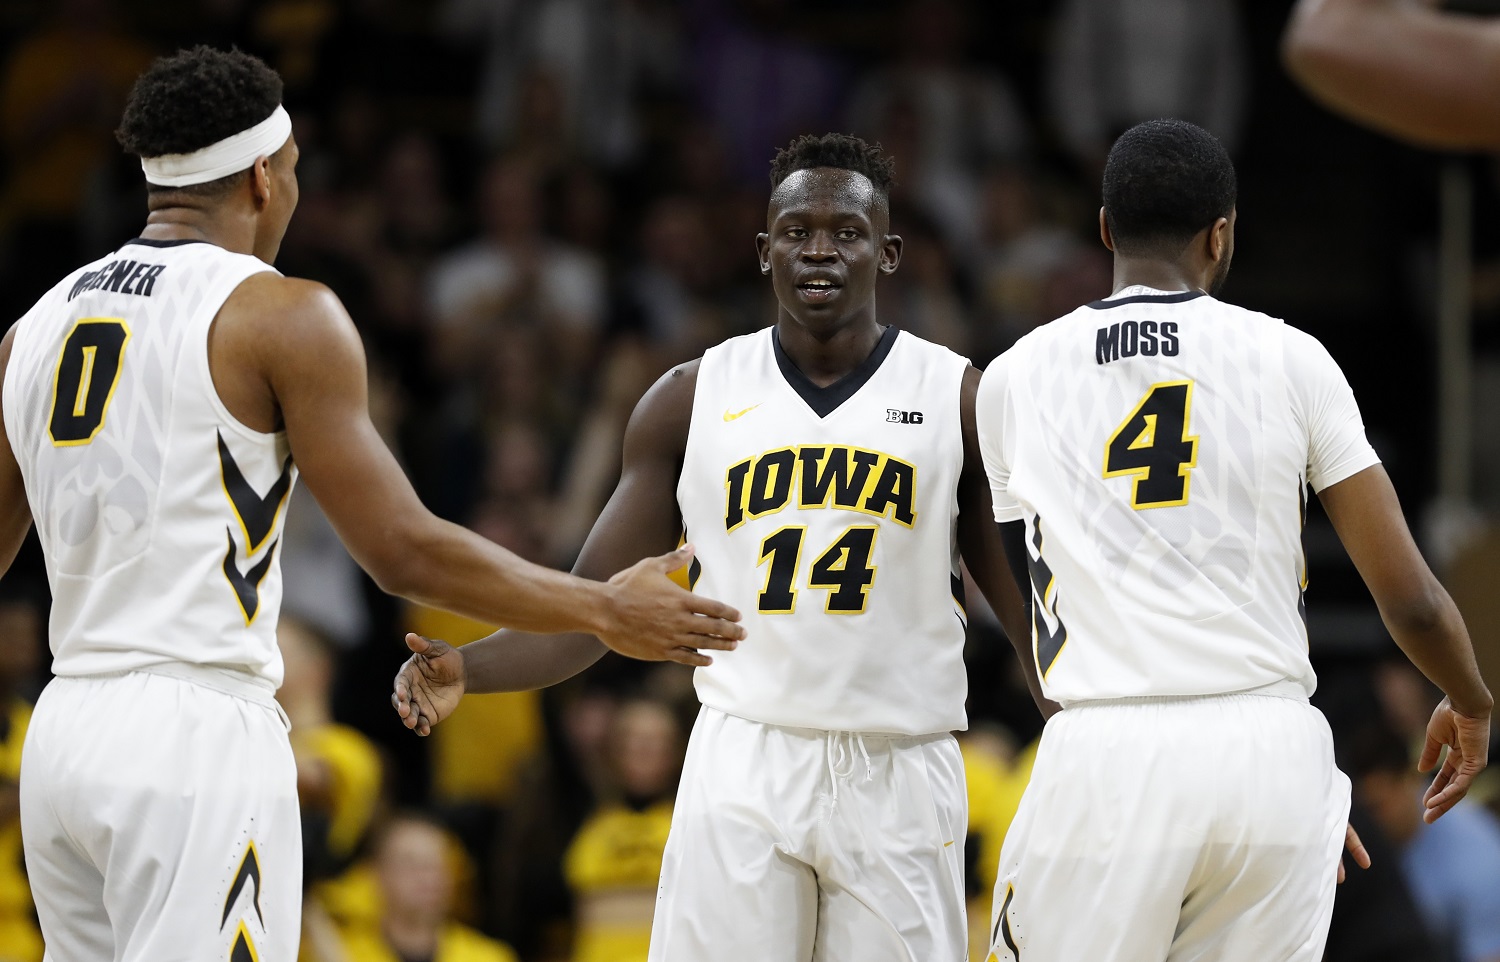 Iowa guard Peter Jok (14) celebrates with teammates Ahmad Wagner, left, and Isaiah Moss, right, during the second half of an NCAA college basketball game, Sunday, March 5, 2017, in Iowa City, Iowa. Iowa won 90-79. (AP Photo/Charlie Neibergall)